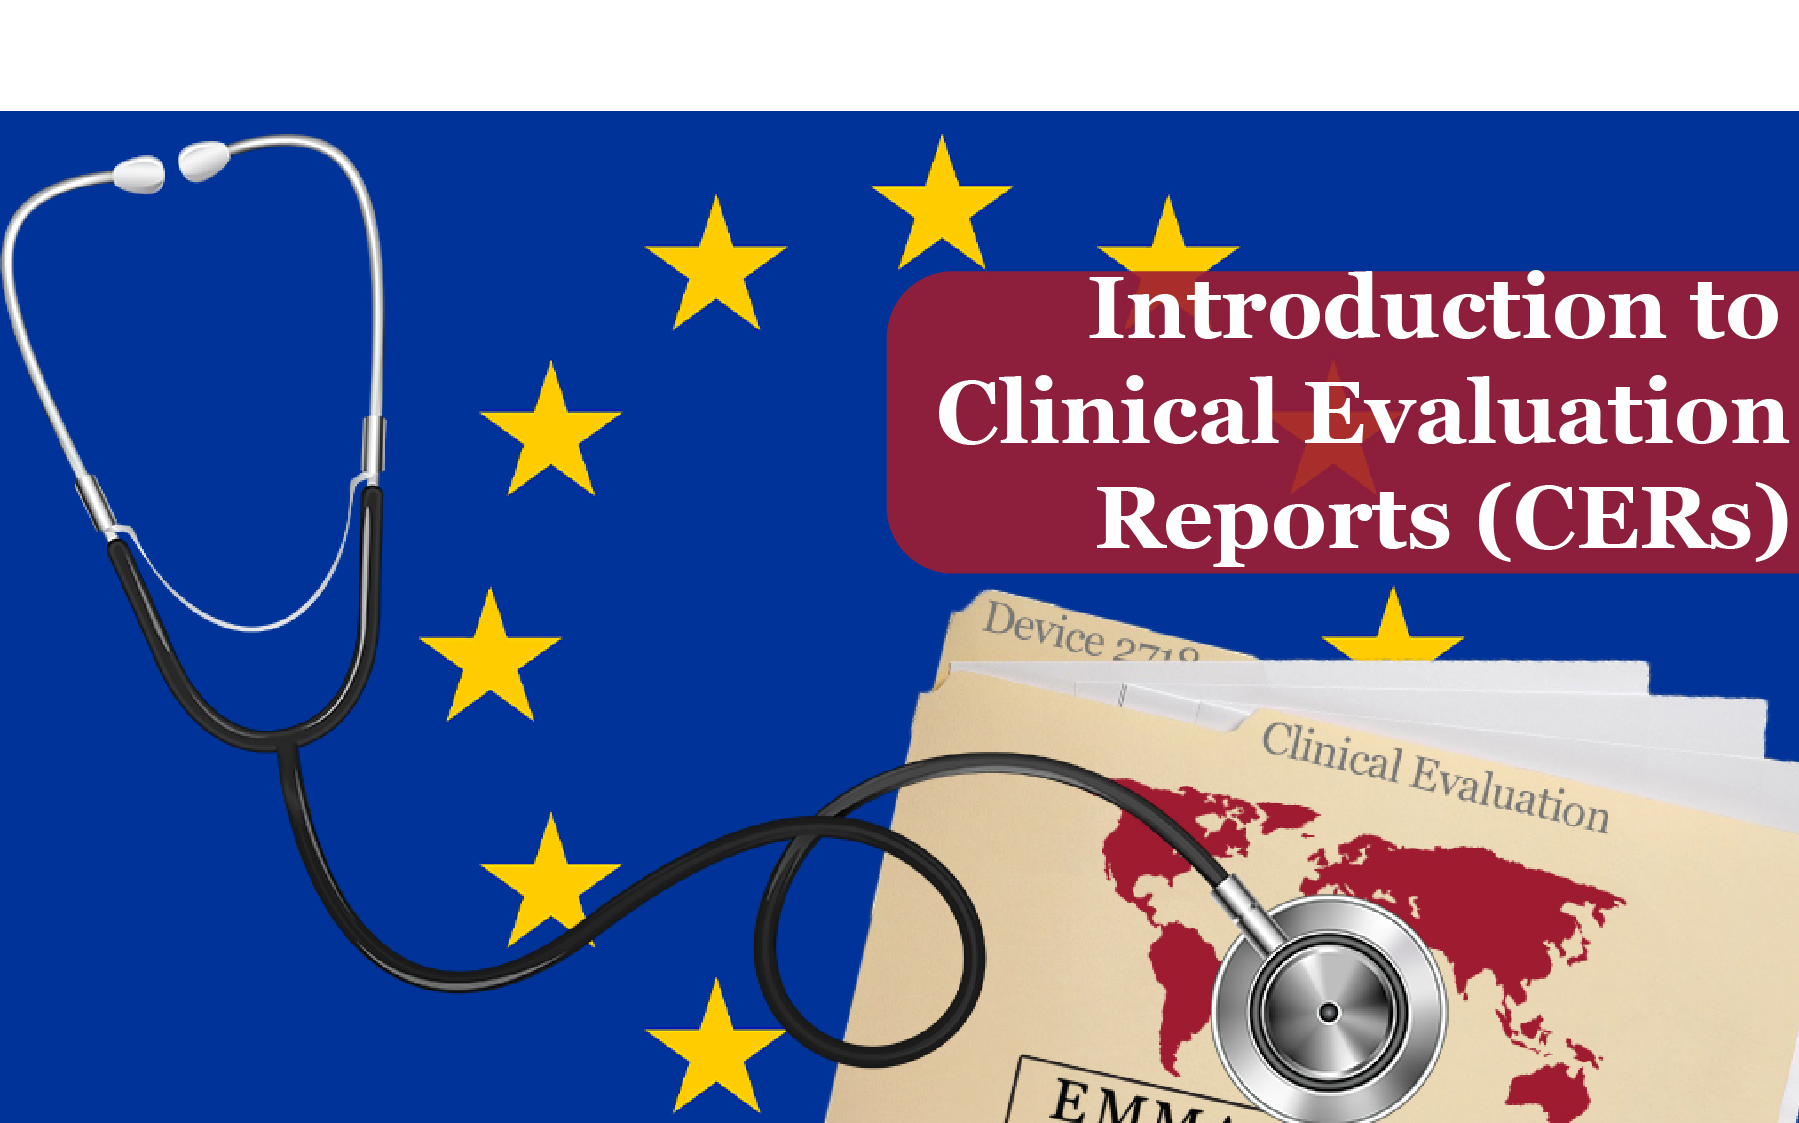 Introduction to Clinical Evaluation Reports (CERs)